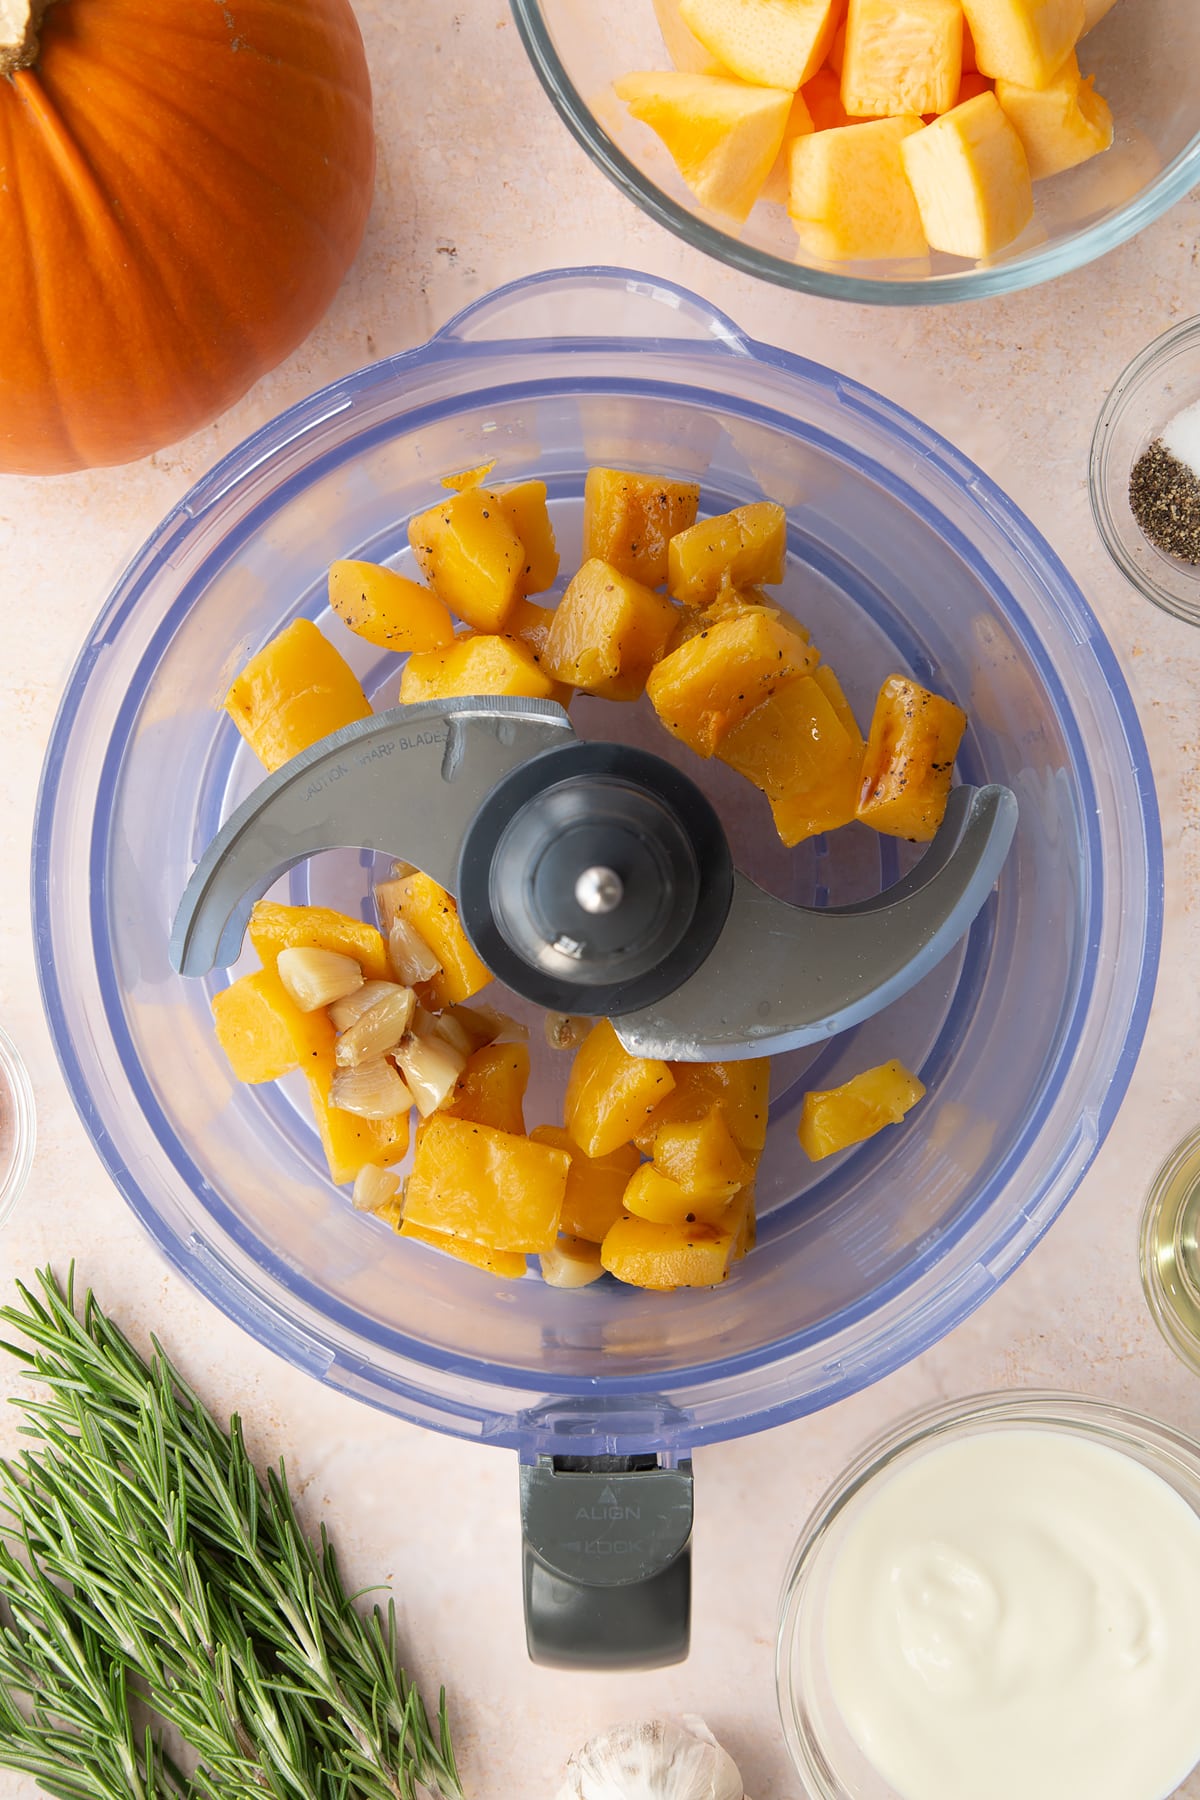 Roasted pumpkin and garlic in a food processor bowl.